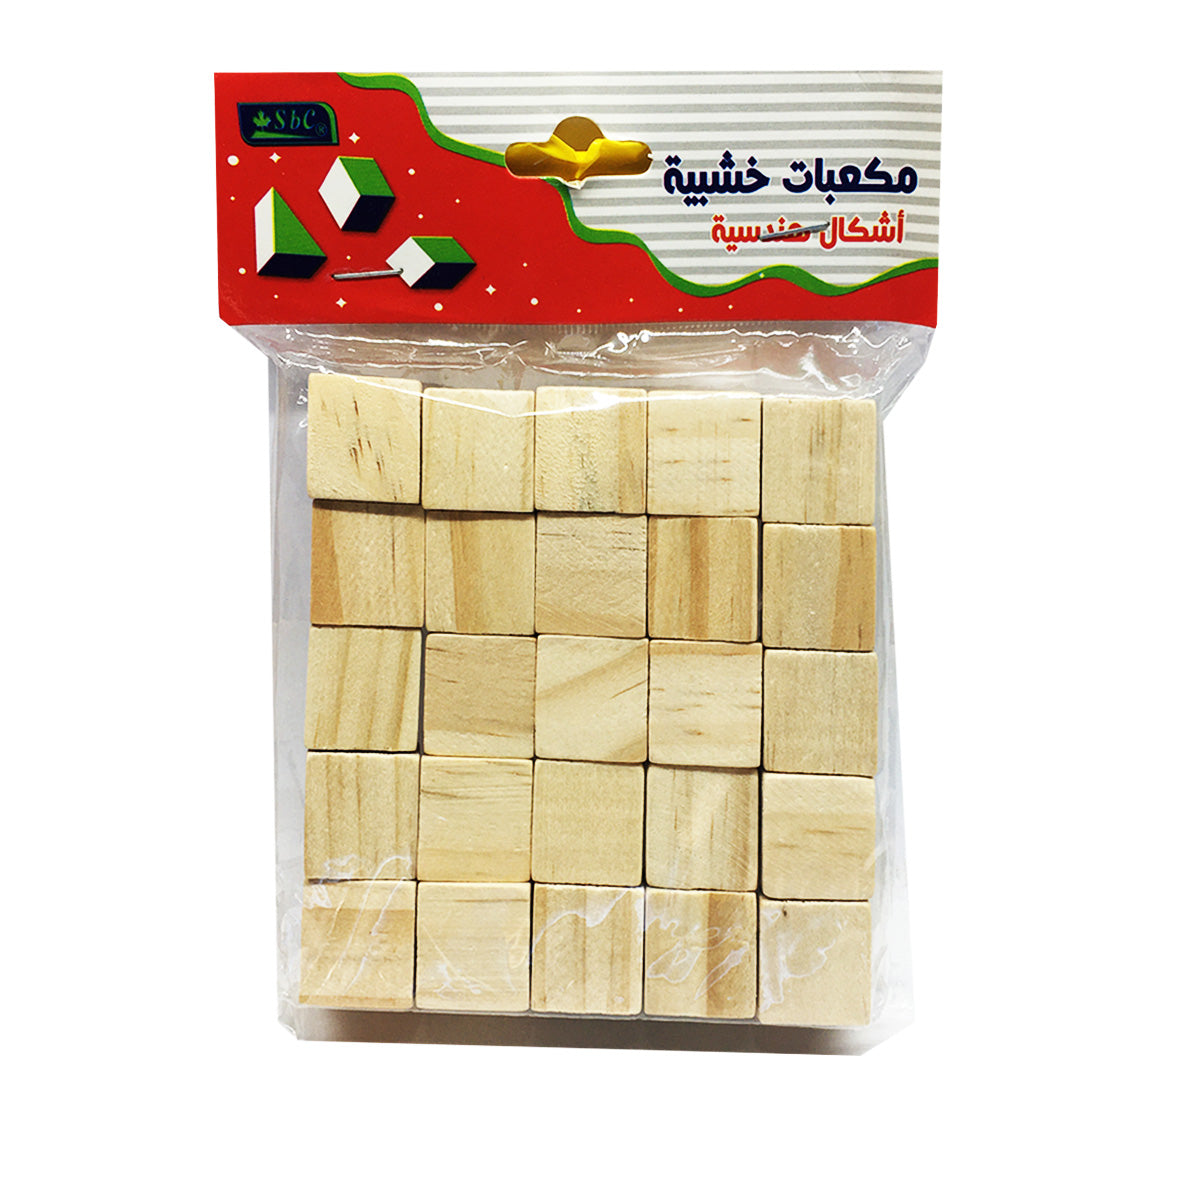 Set of Wooden Cubes For Best Price in Abu Dhabi,UAE